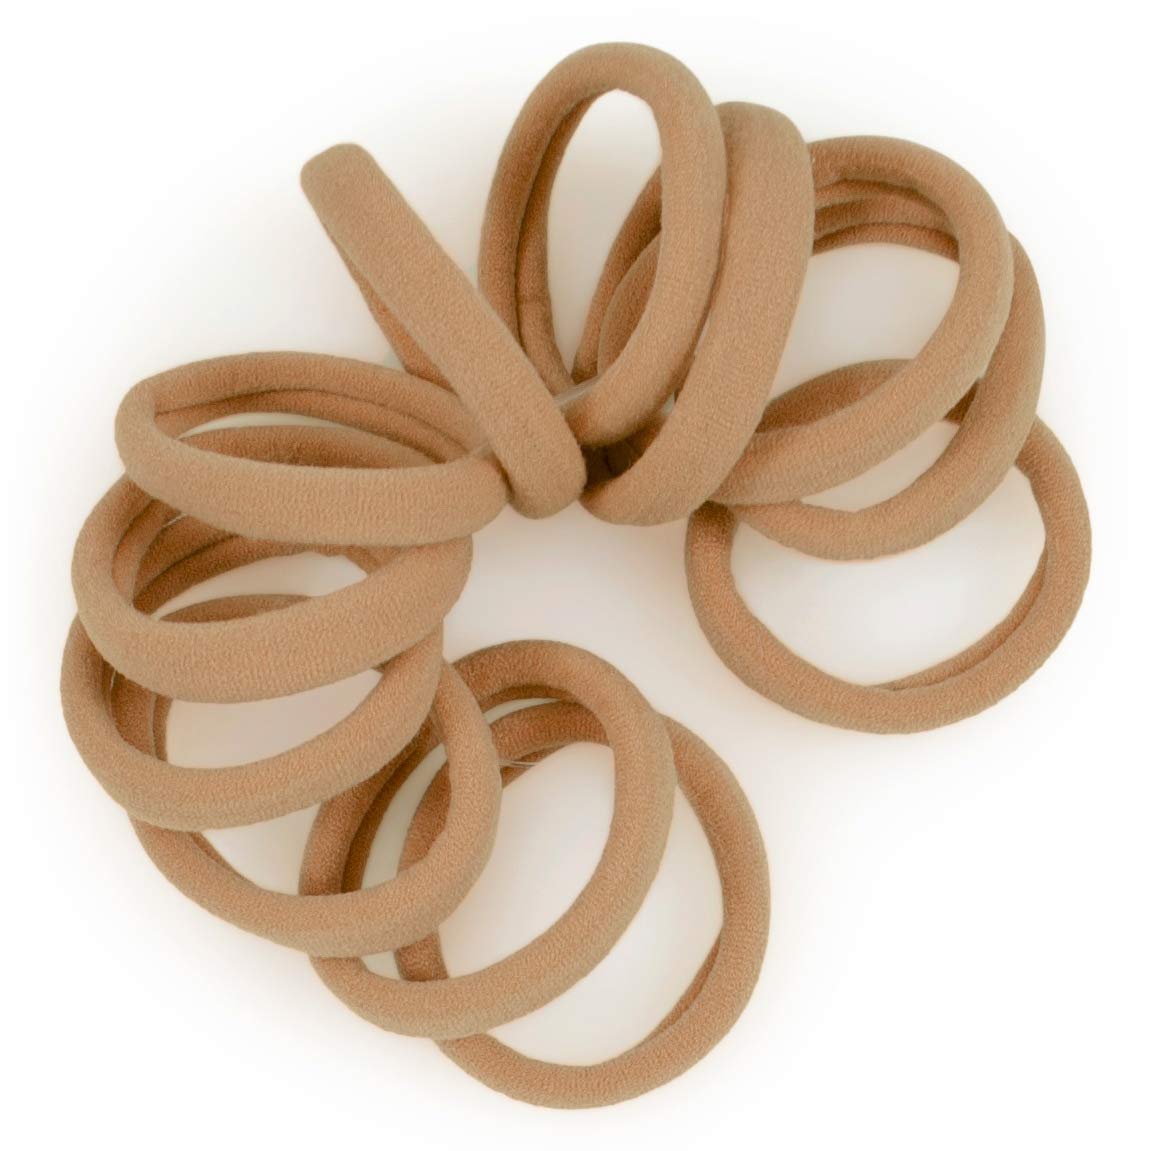 Cyndibands Soft and Stretchy Gentle Hold Seamless Elastic Fabric No-Metal Ponytail  Holders - 12 Hair Ties (Medium/Dark Blonde)